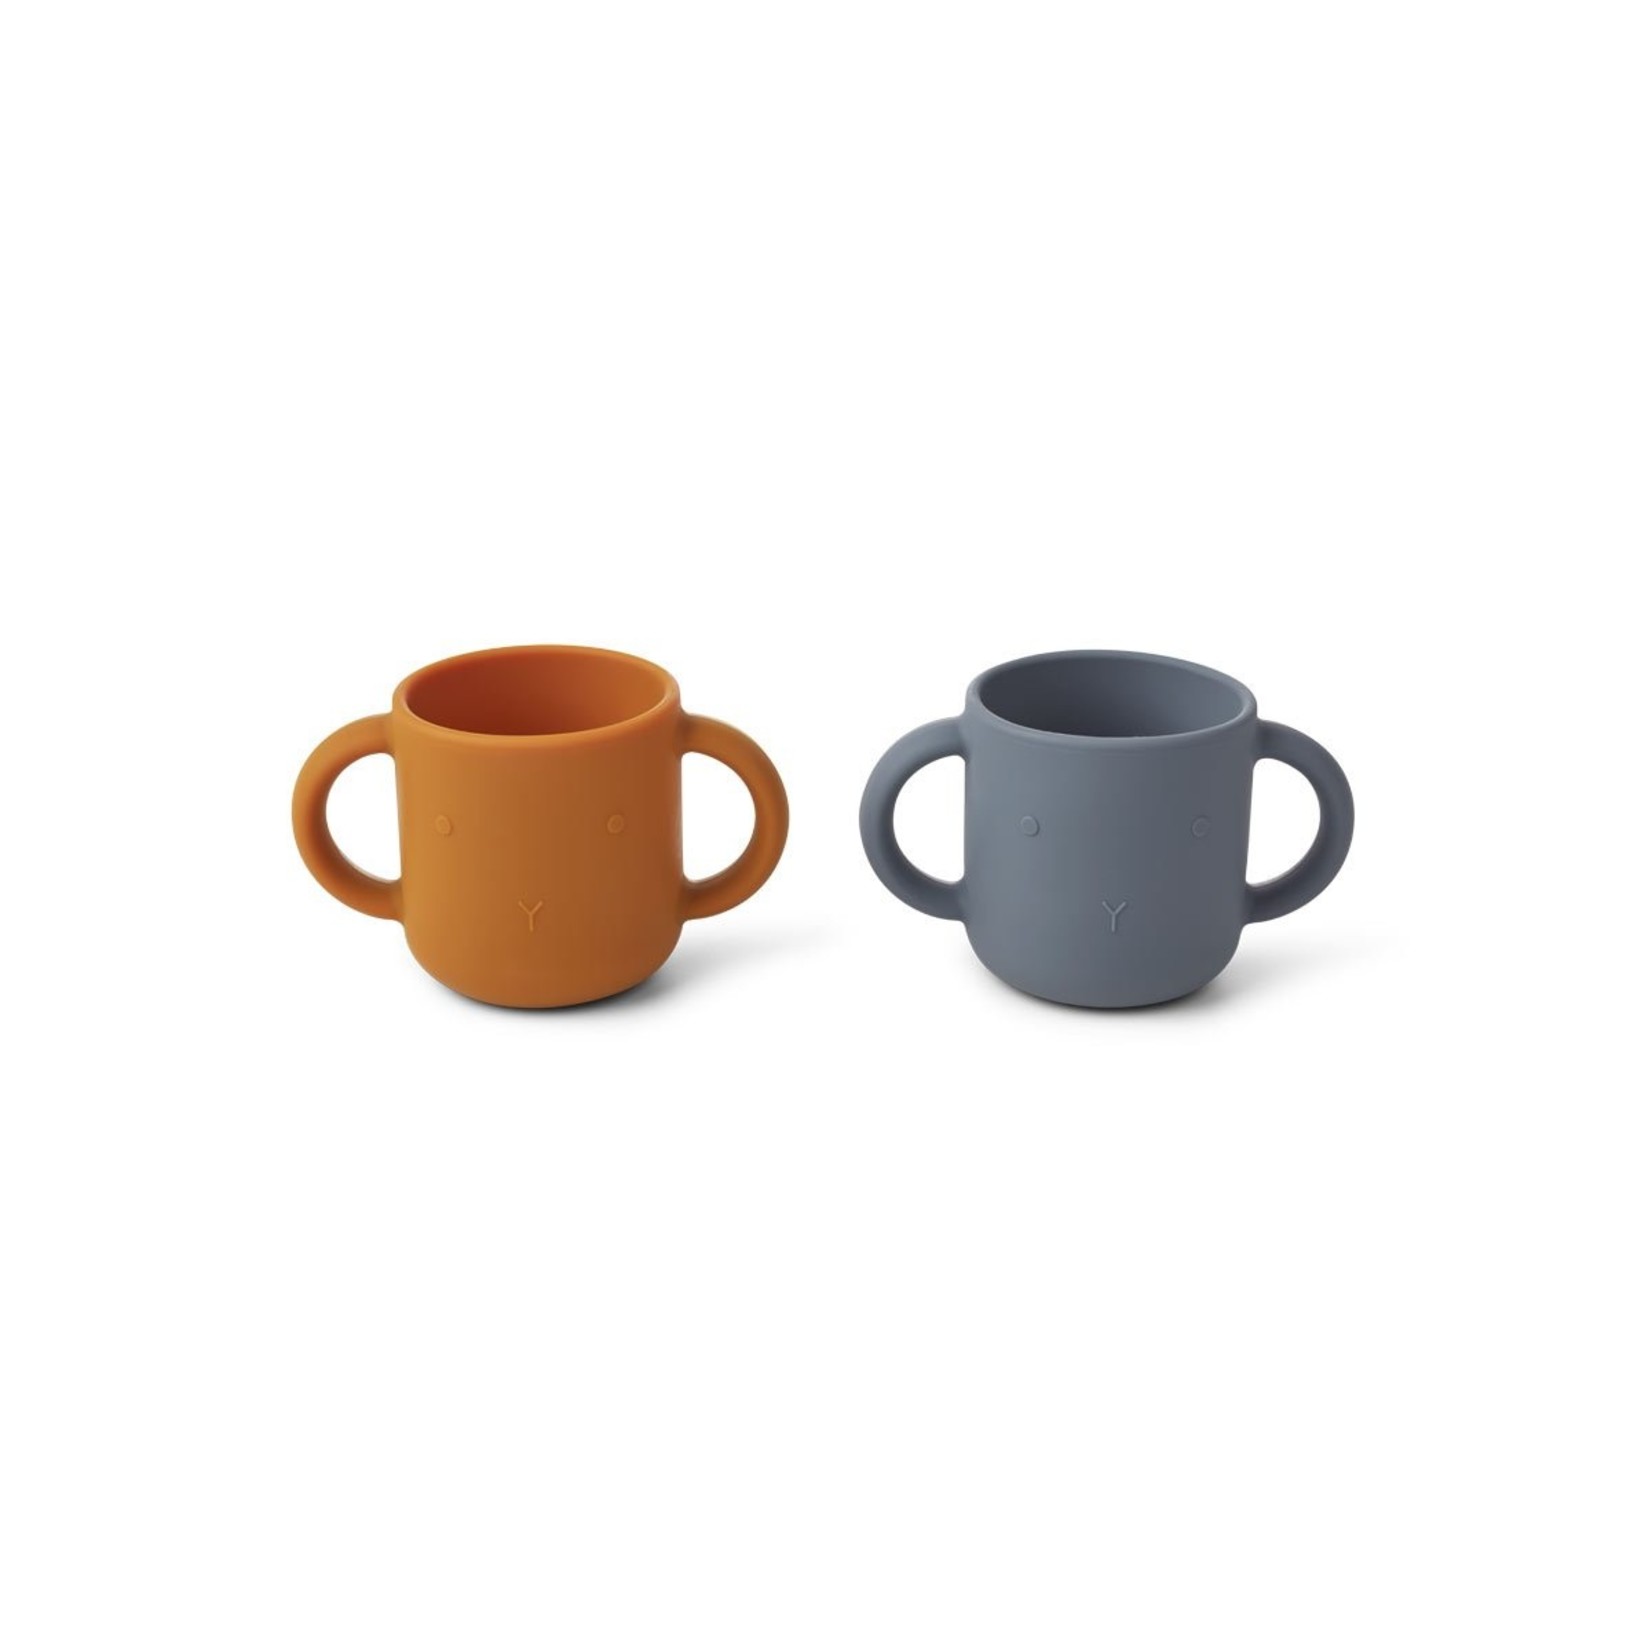 liewood Liewood-SS21 LW14155 Gene silicone cup - 2 pack